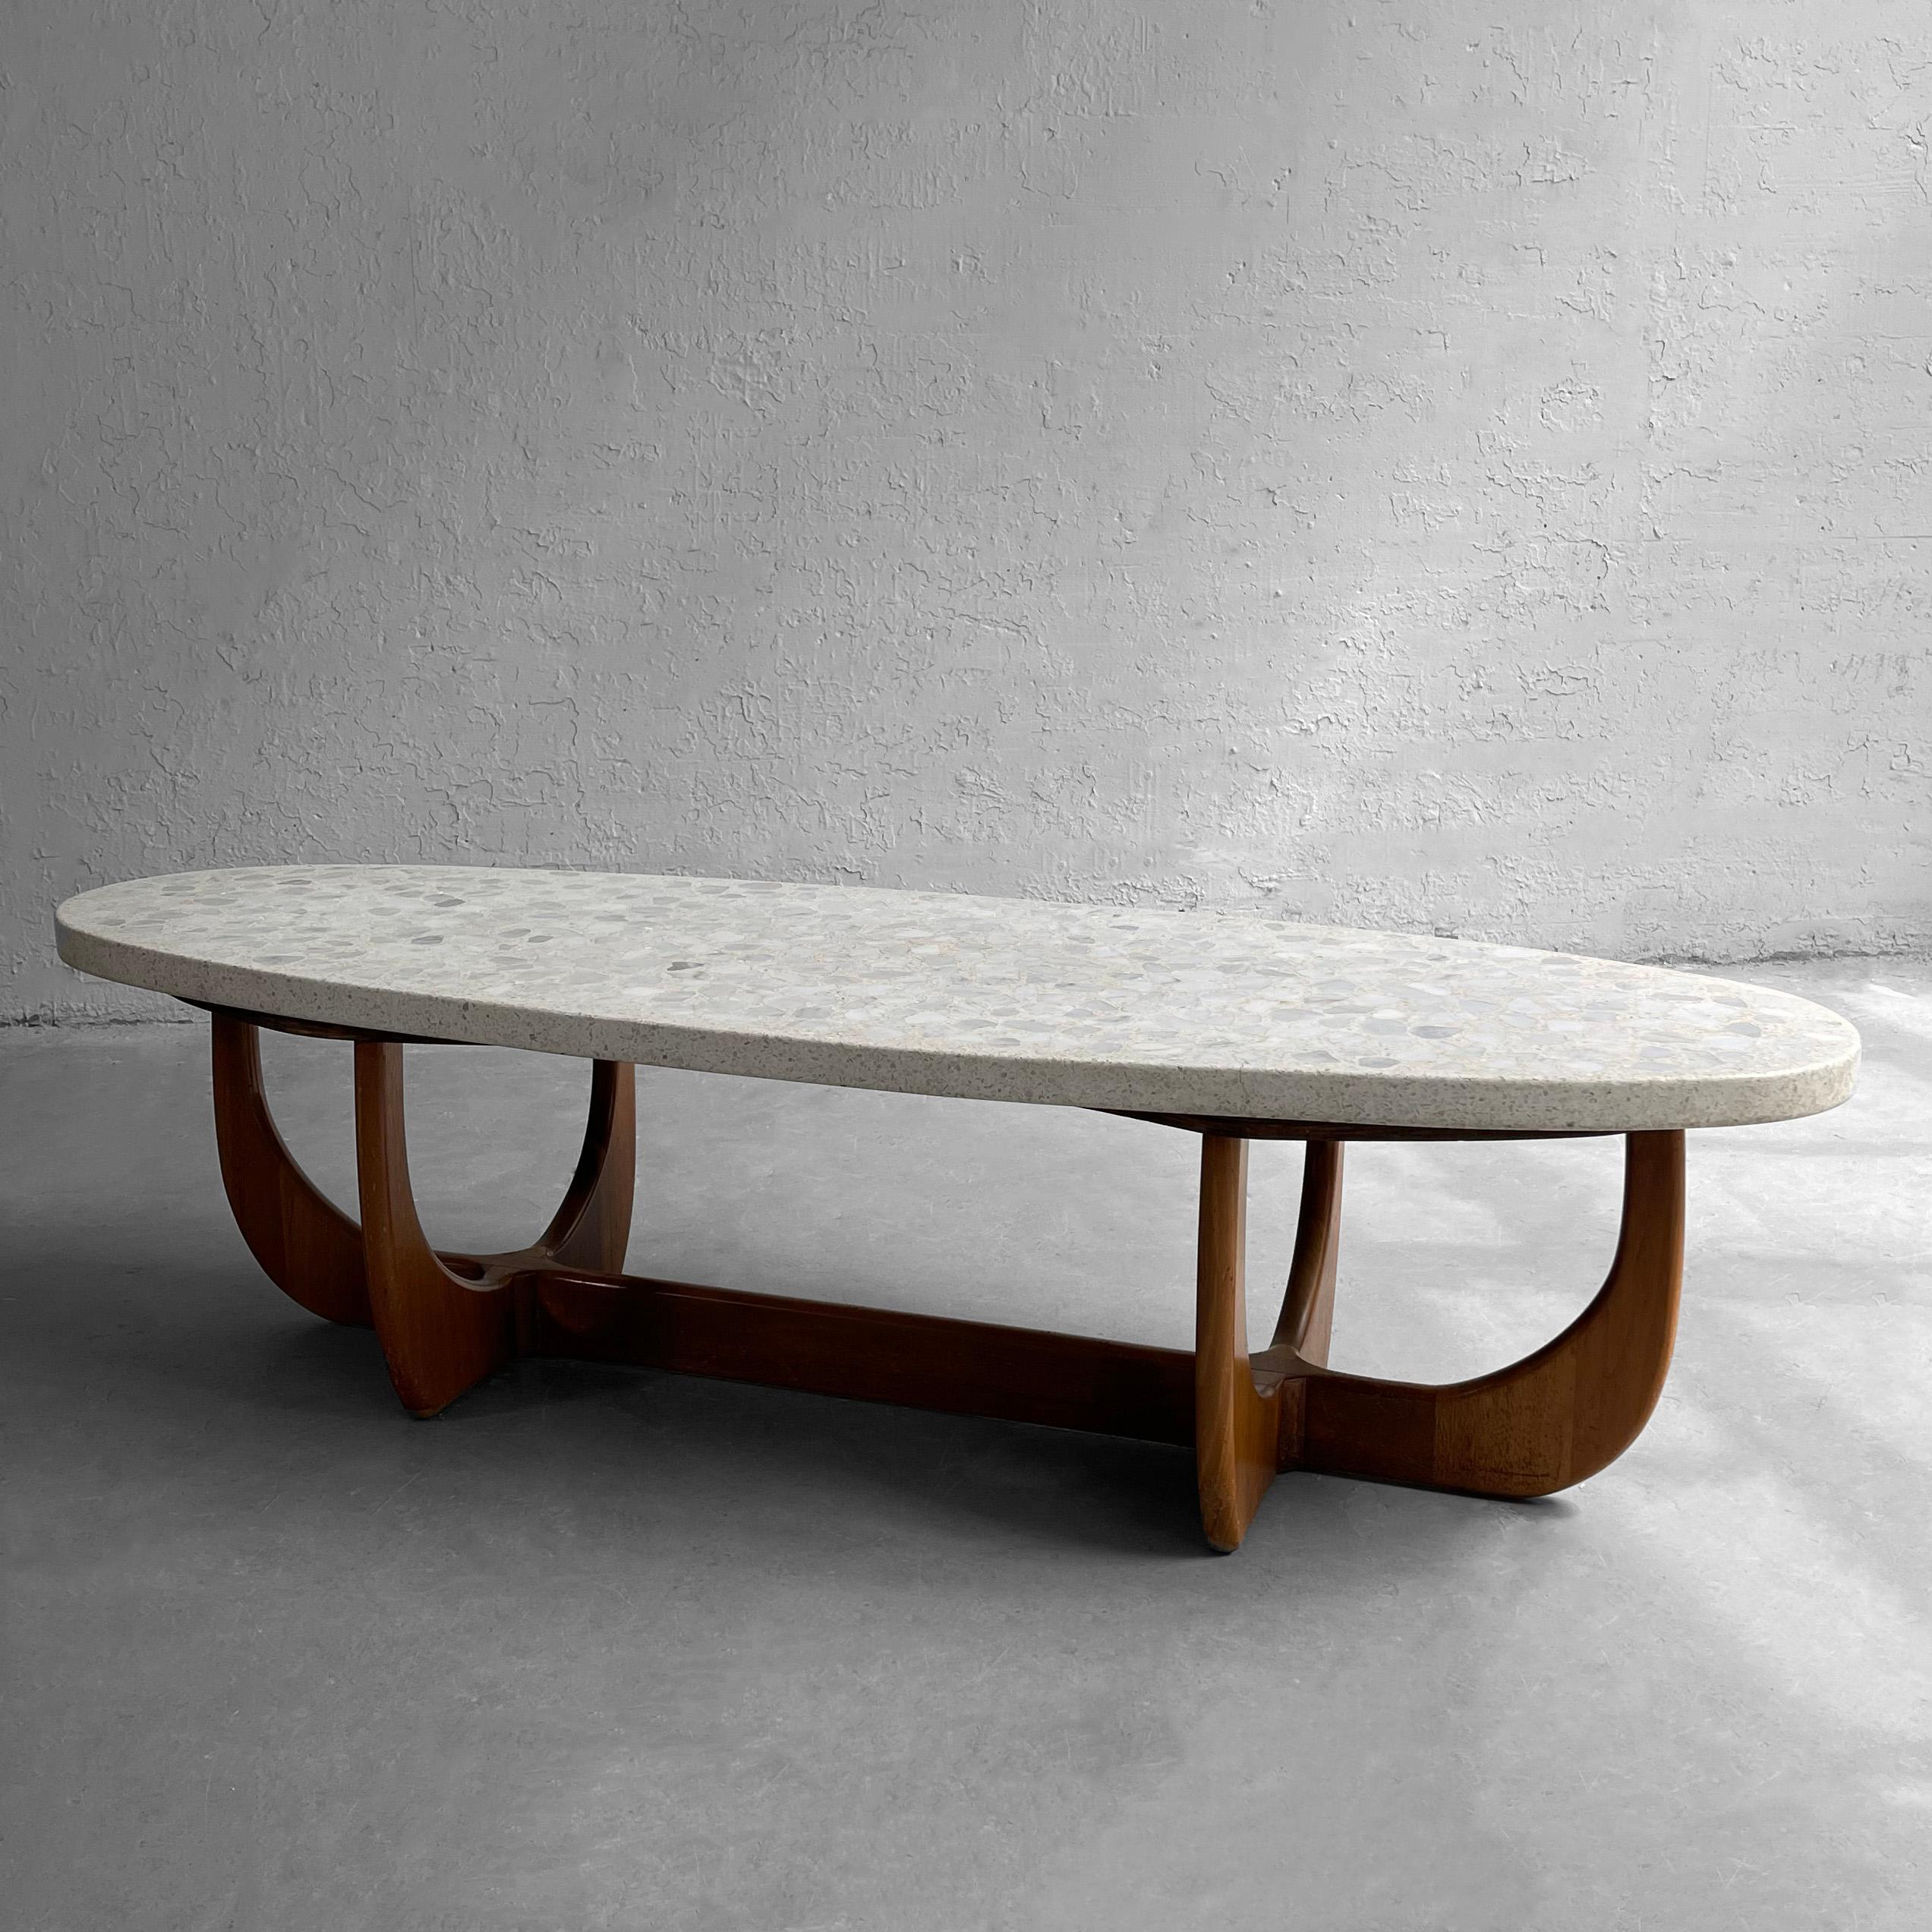 Mid-Century Modern, coffee table by Harvey Probber features an oblong, oval, terrazzo stone top with sculptural walnut base.